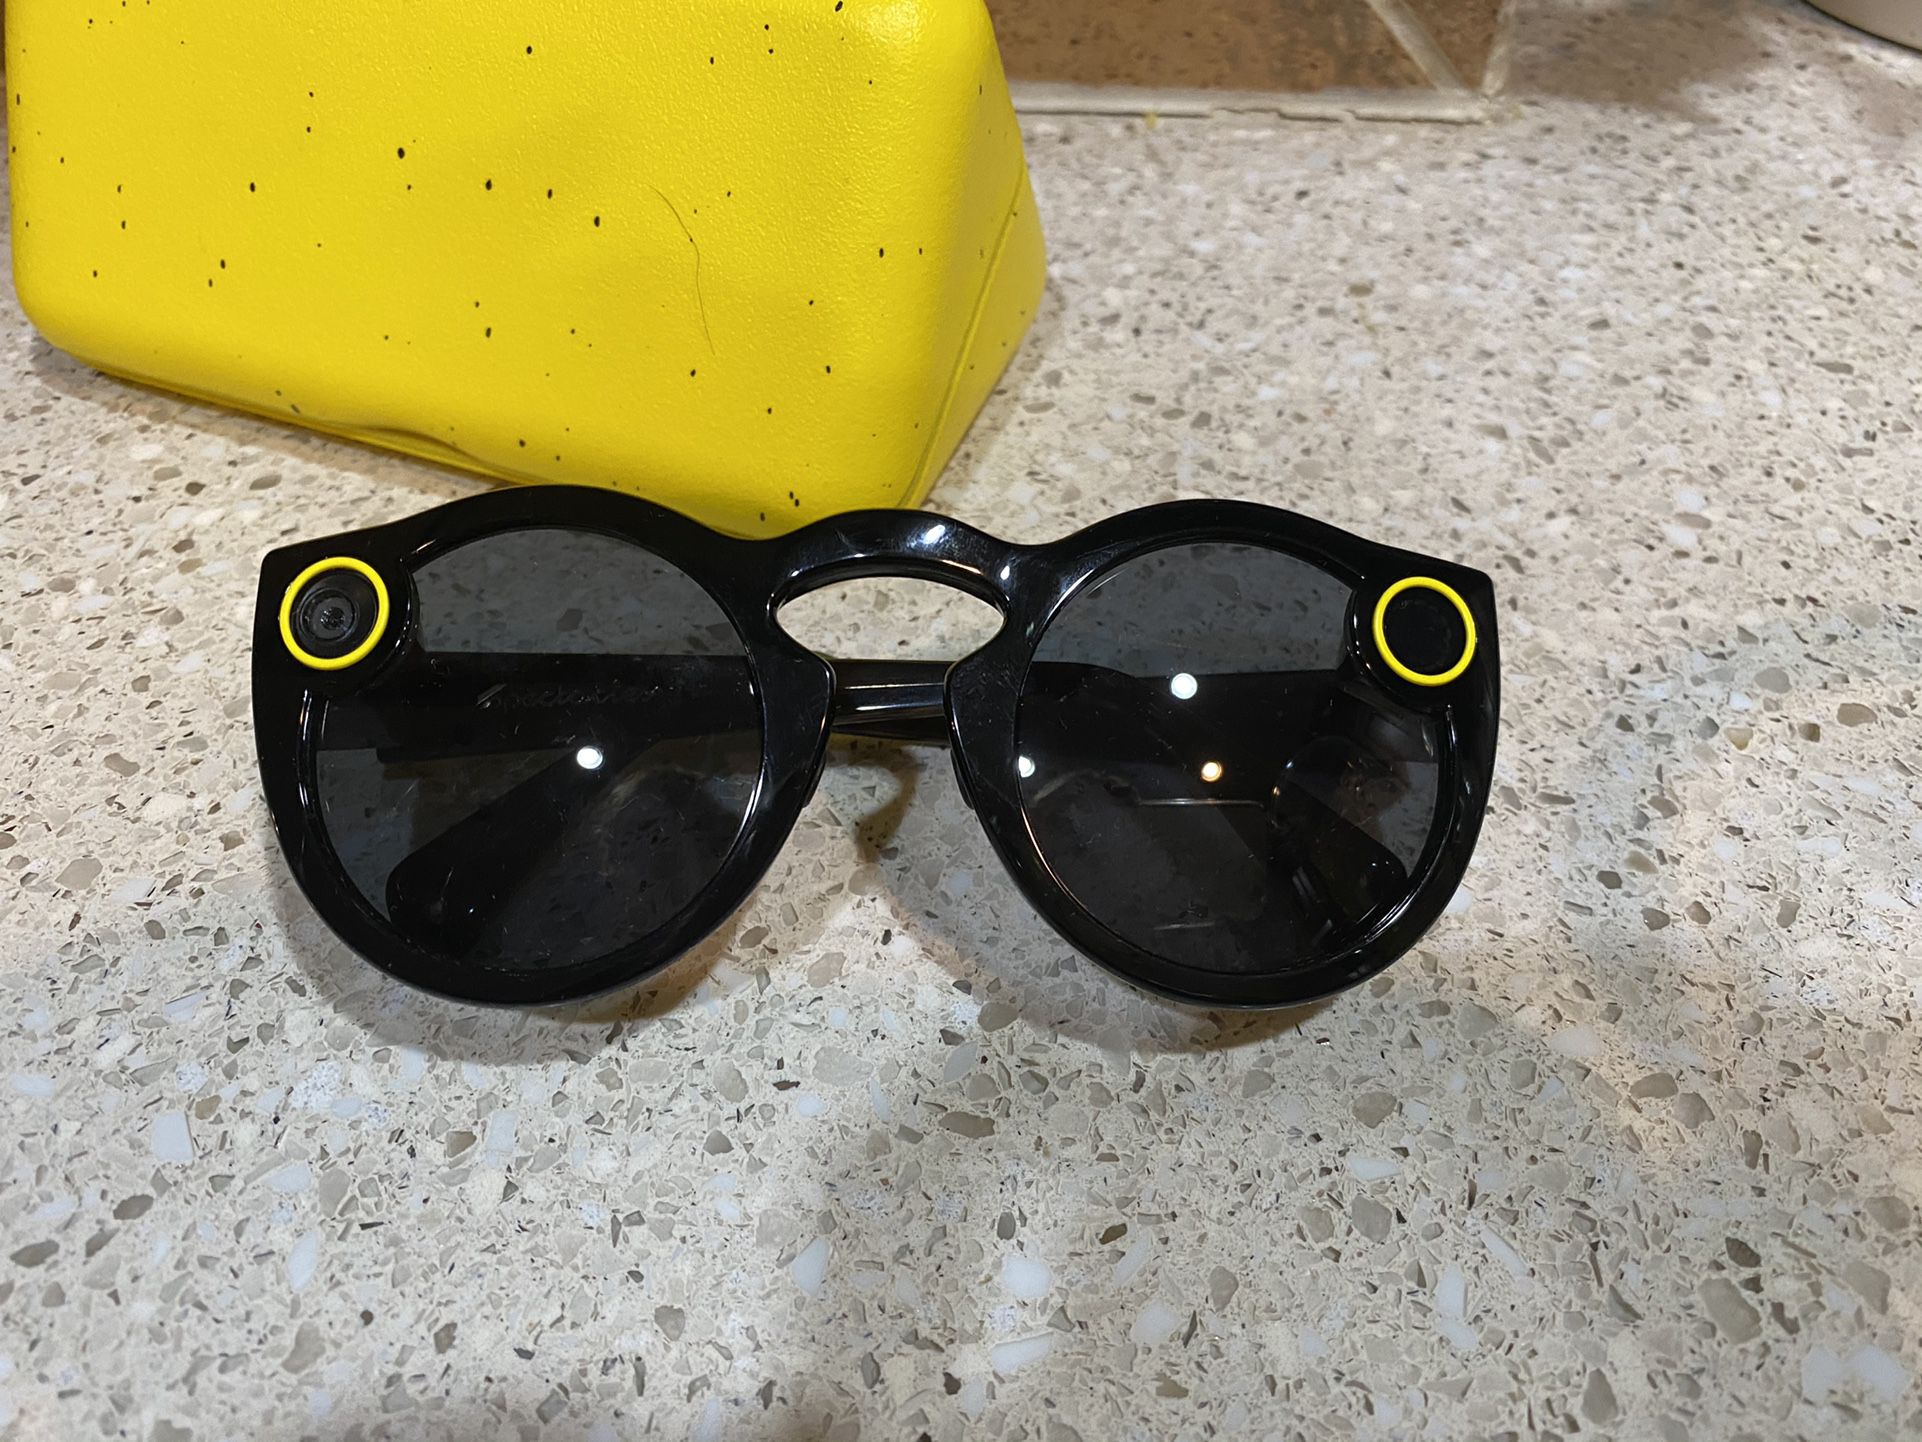 Snapchat Spectacles- Camera Sunglasses